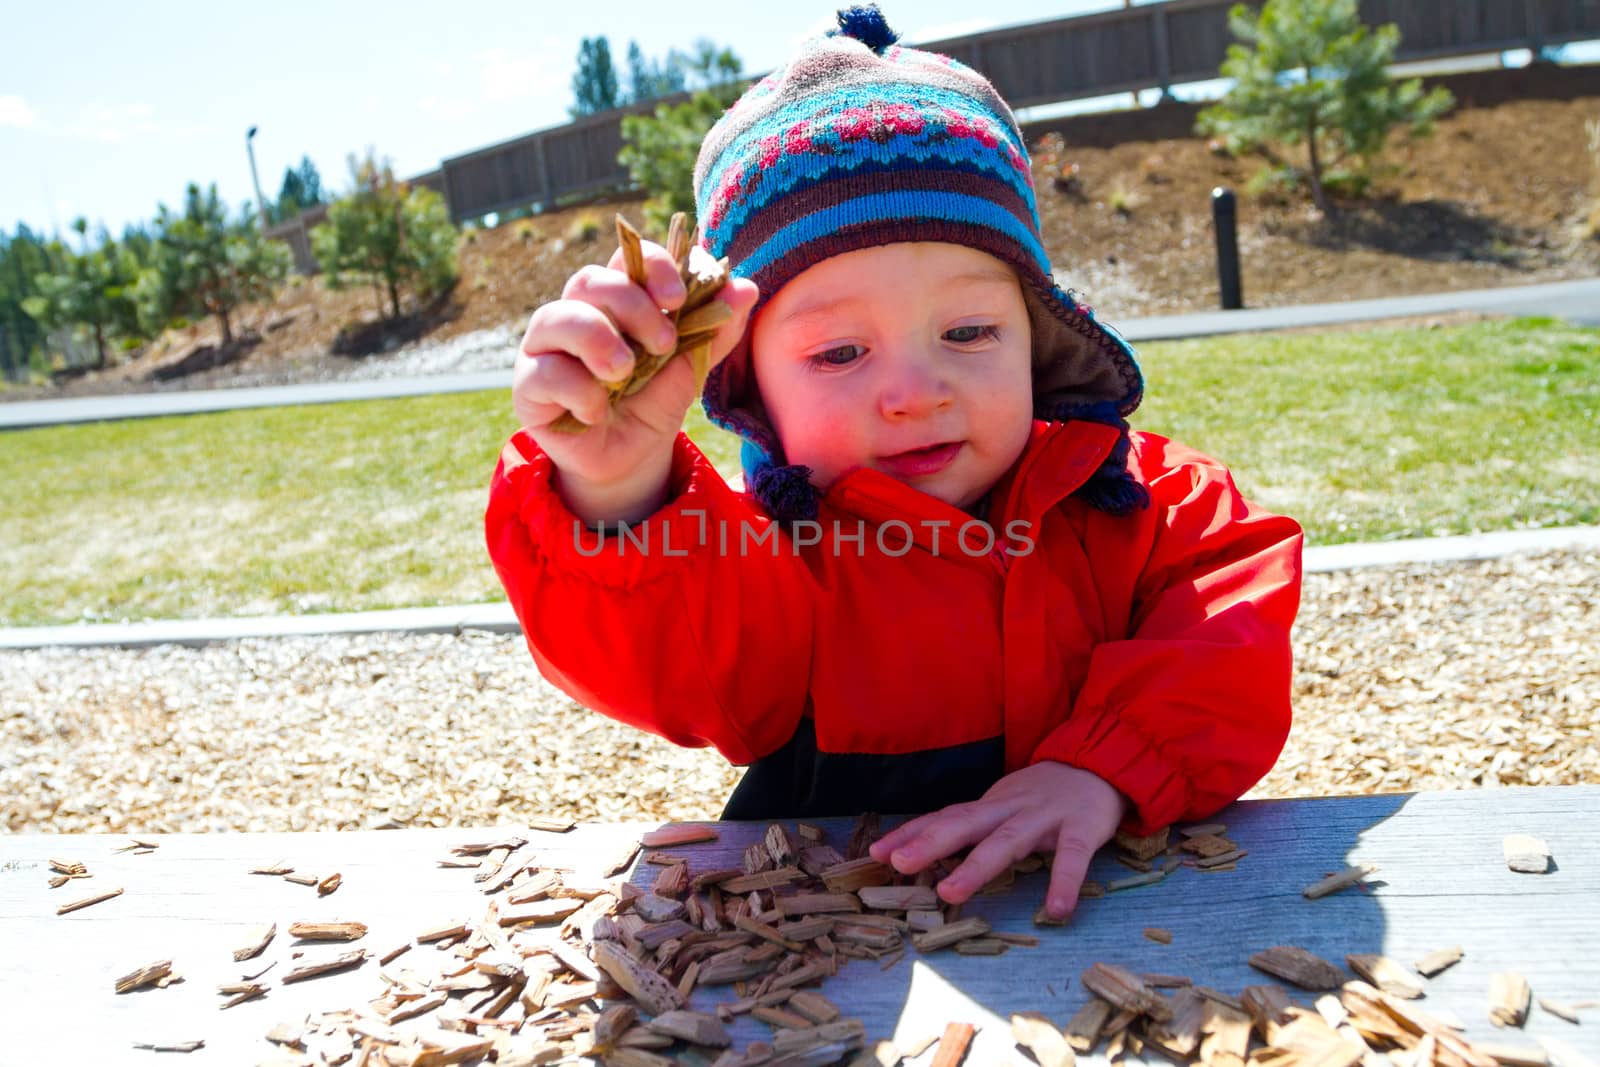 One Year Old Playing at Park by joshuaraineyphotography